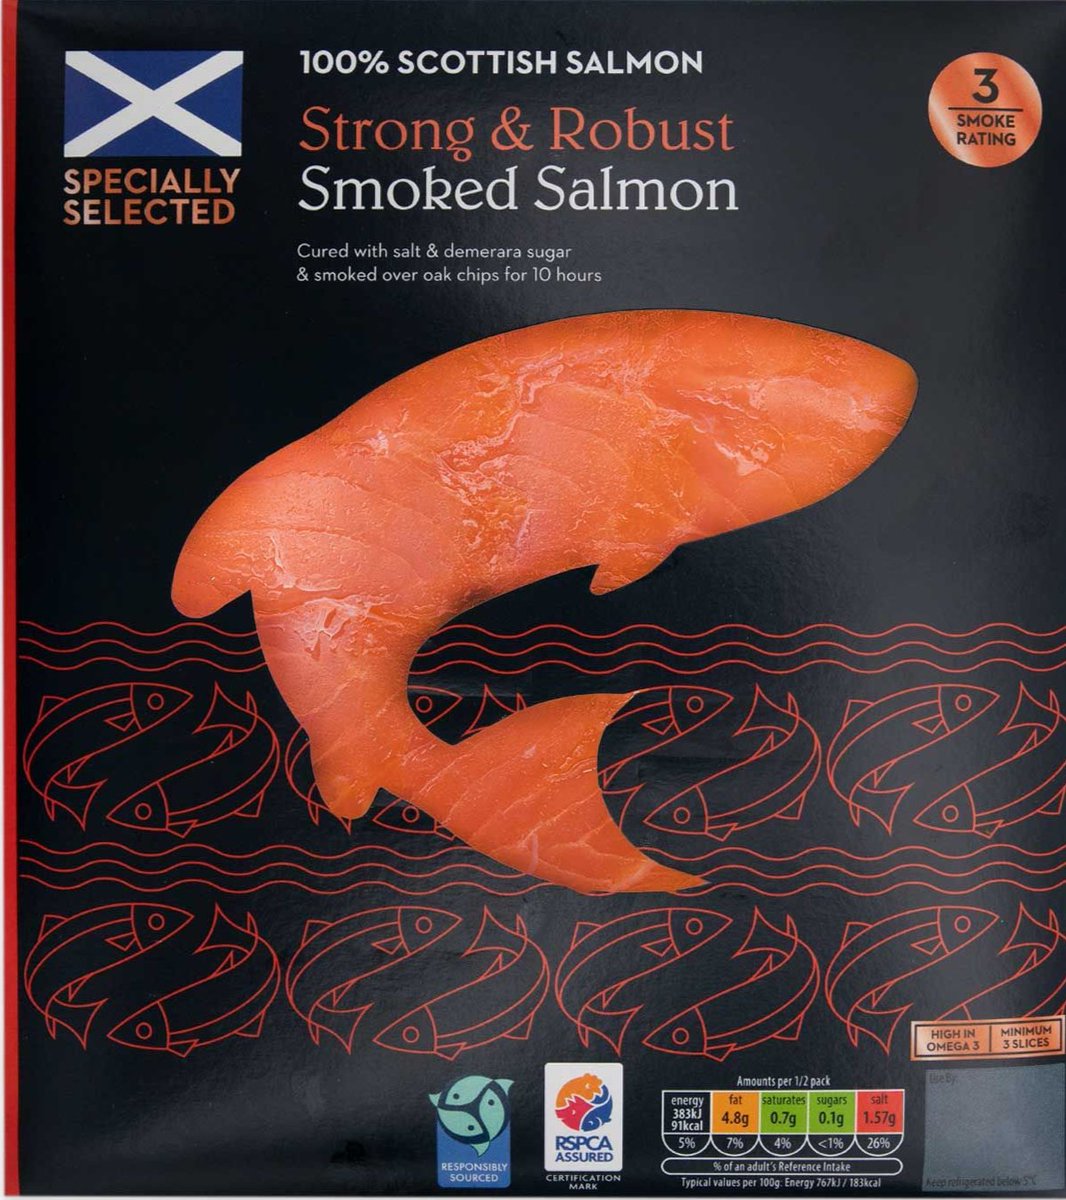 🌸🐟 Celebrate Easter in style with some delightful smoked salmon from @AldiUK, just perfect for sharing with your nearest and dearest! 😊🍽️ Enjoy the taste while also supporting higher welfare farming. 🌿🐟 #AldiUK #SmokedSalmon #Easter2023 #EasterDelights #EthicalChoices